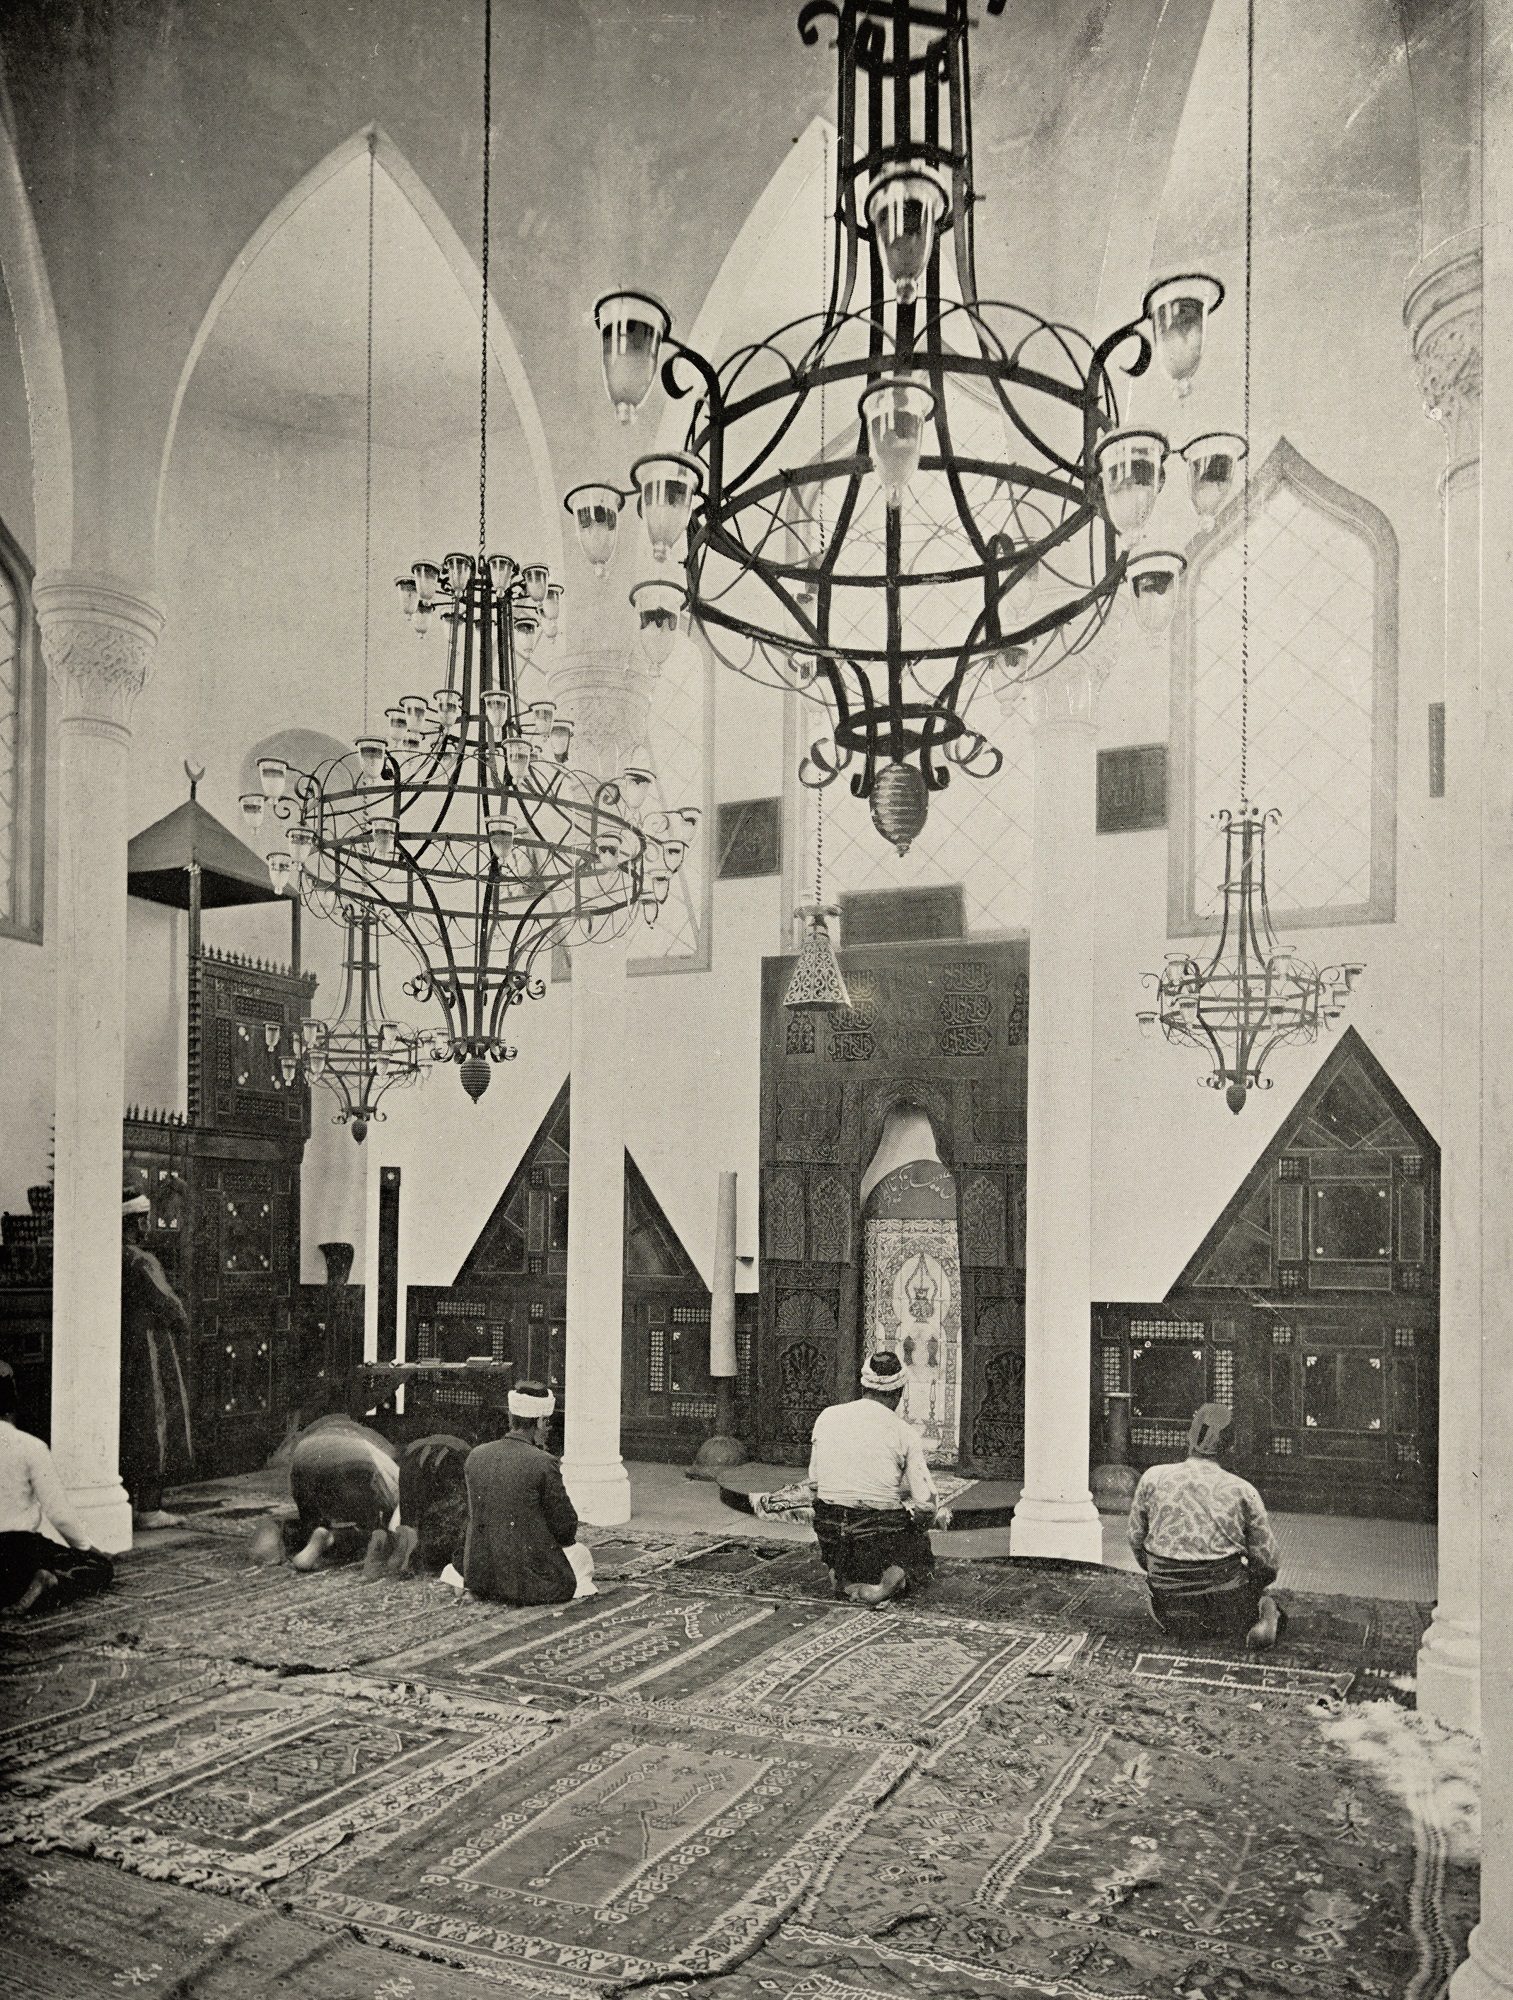 Inside the Turkish mosque in the Turkish Village on the Midway Plaisance.